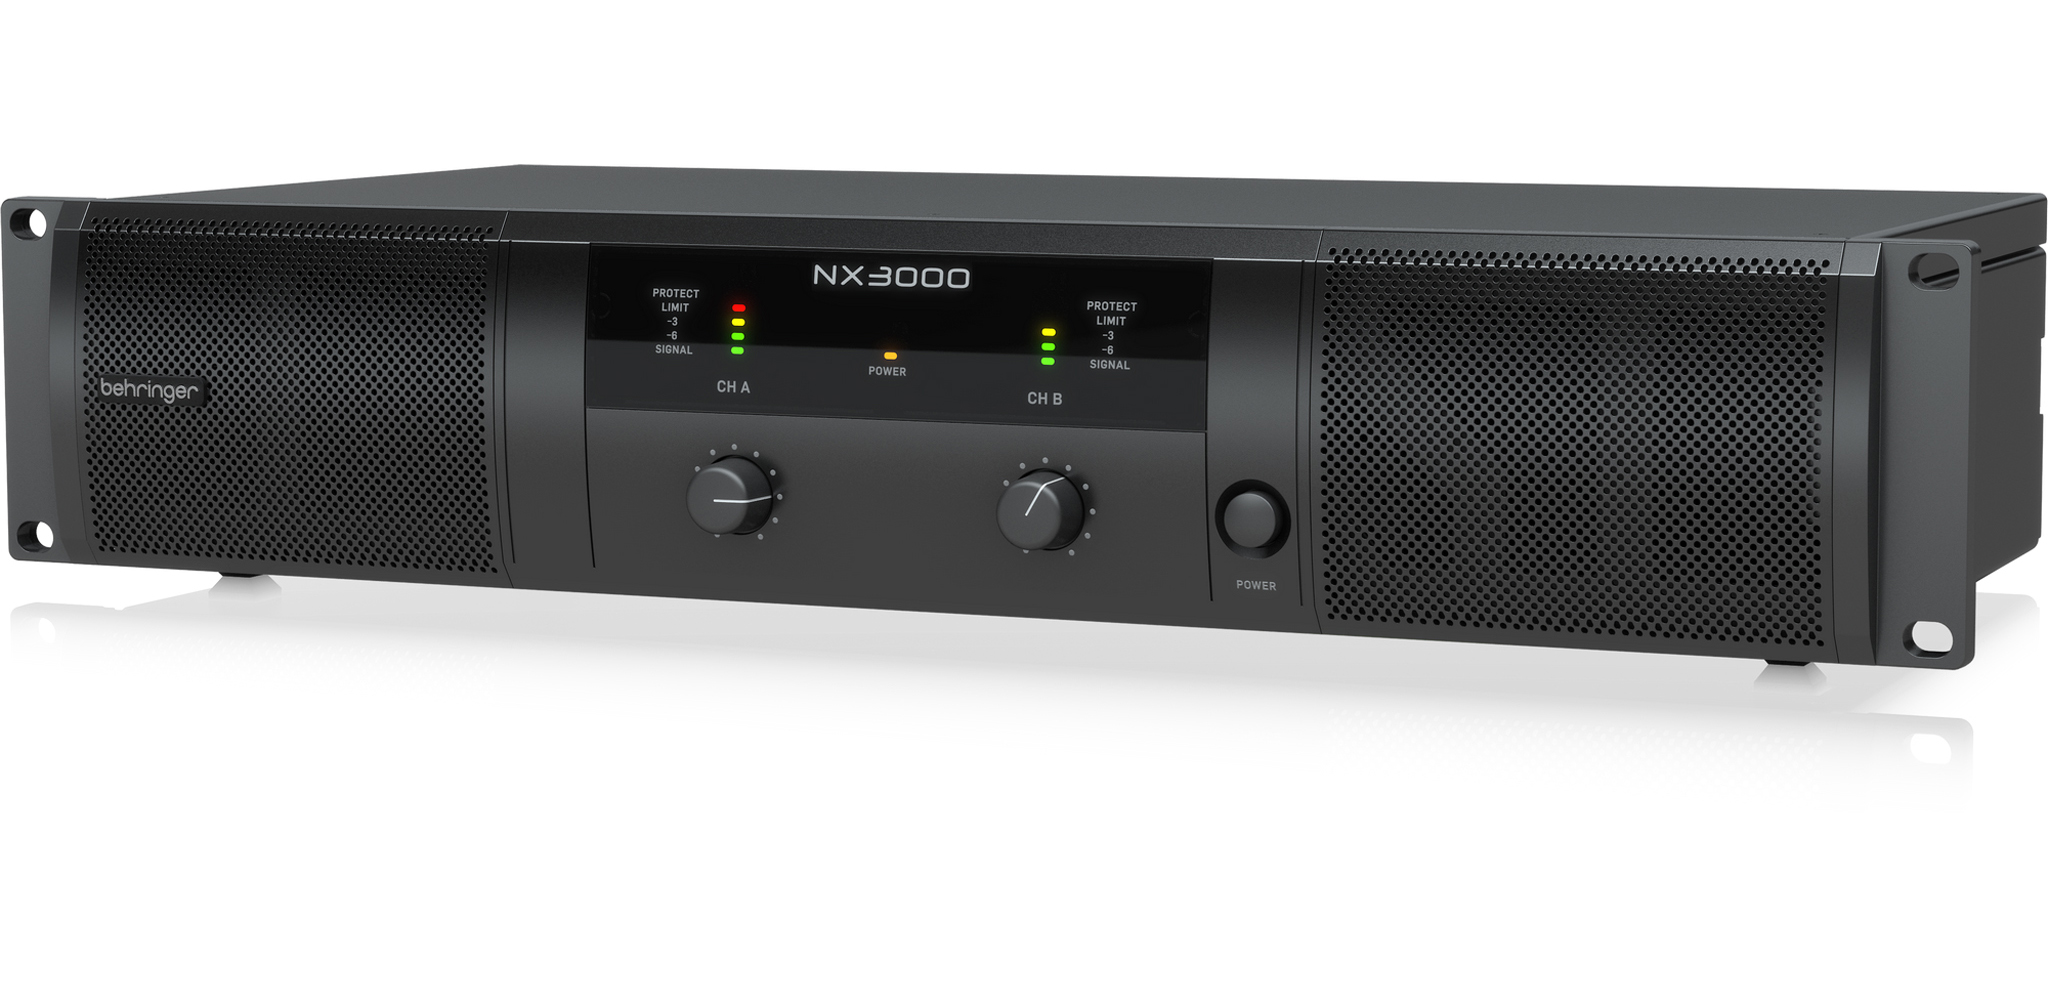 NX3000 Behringer Amply r